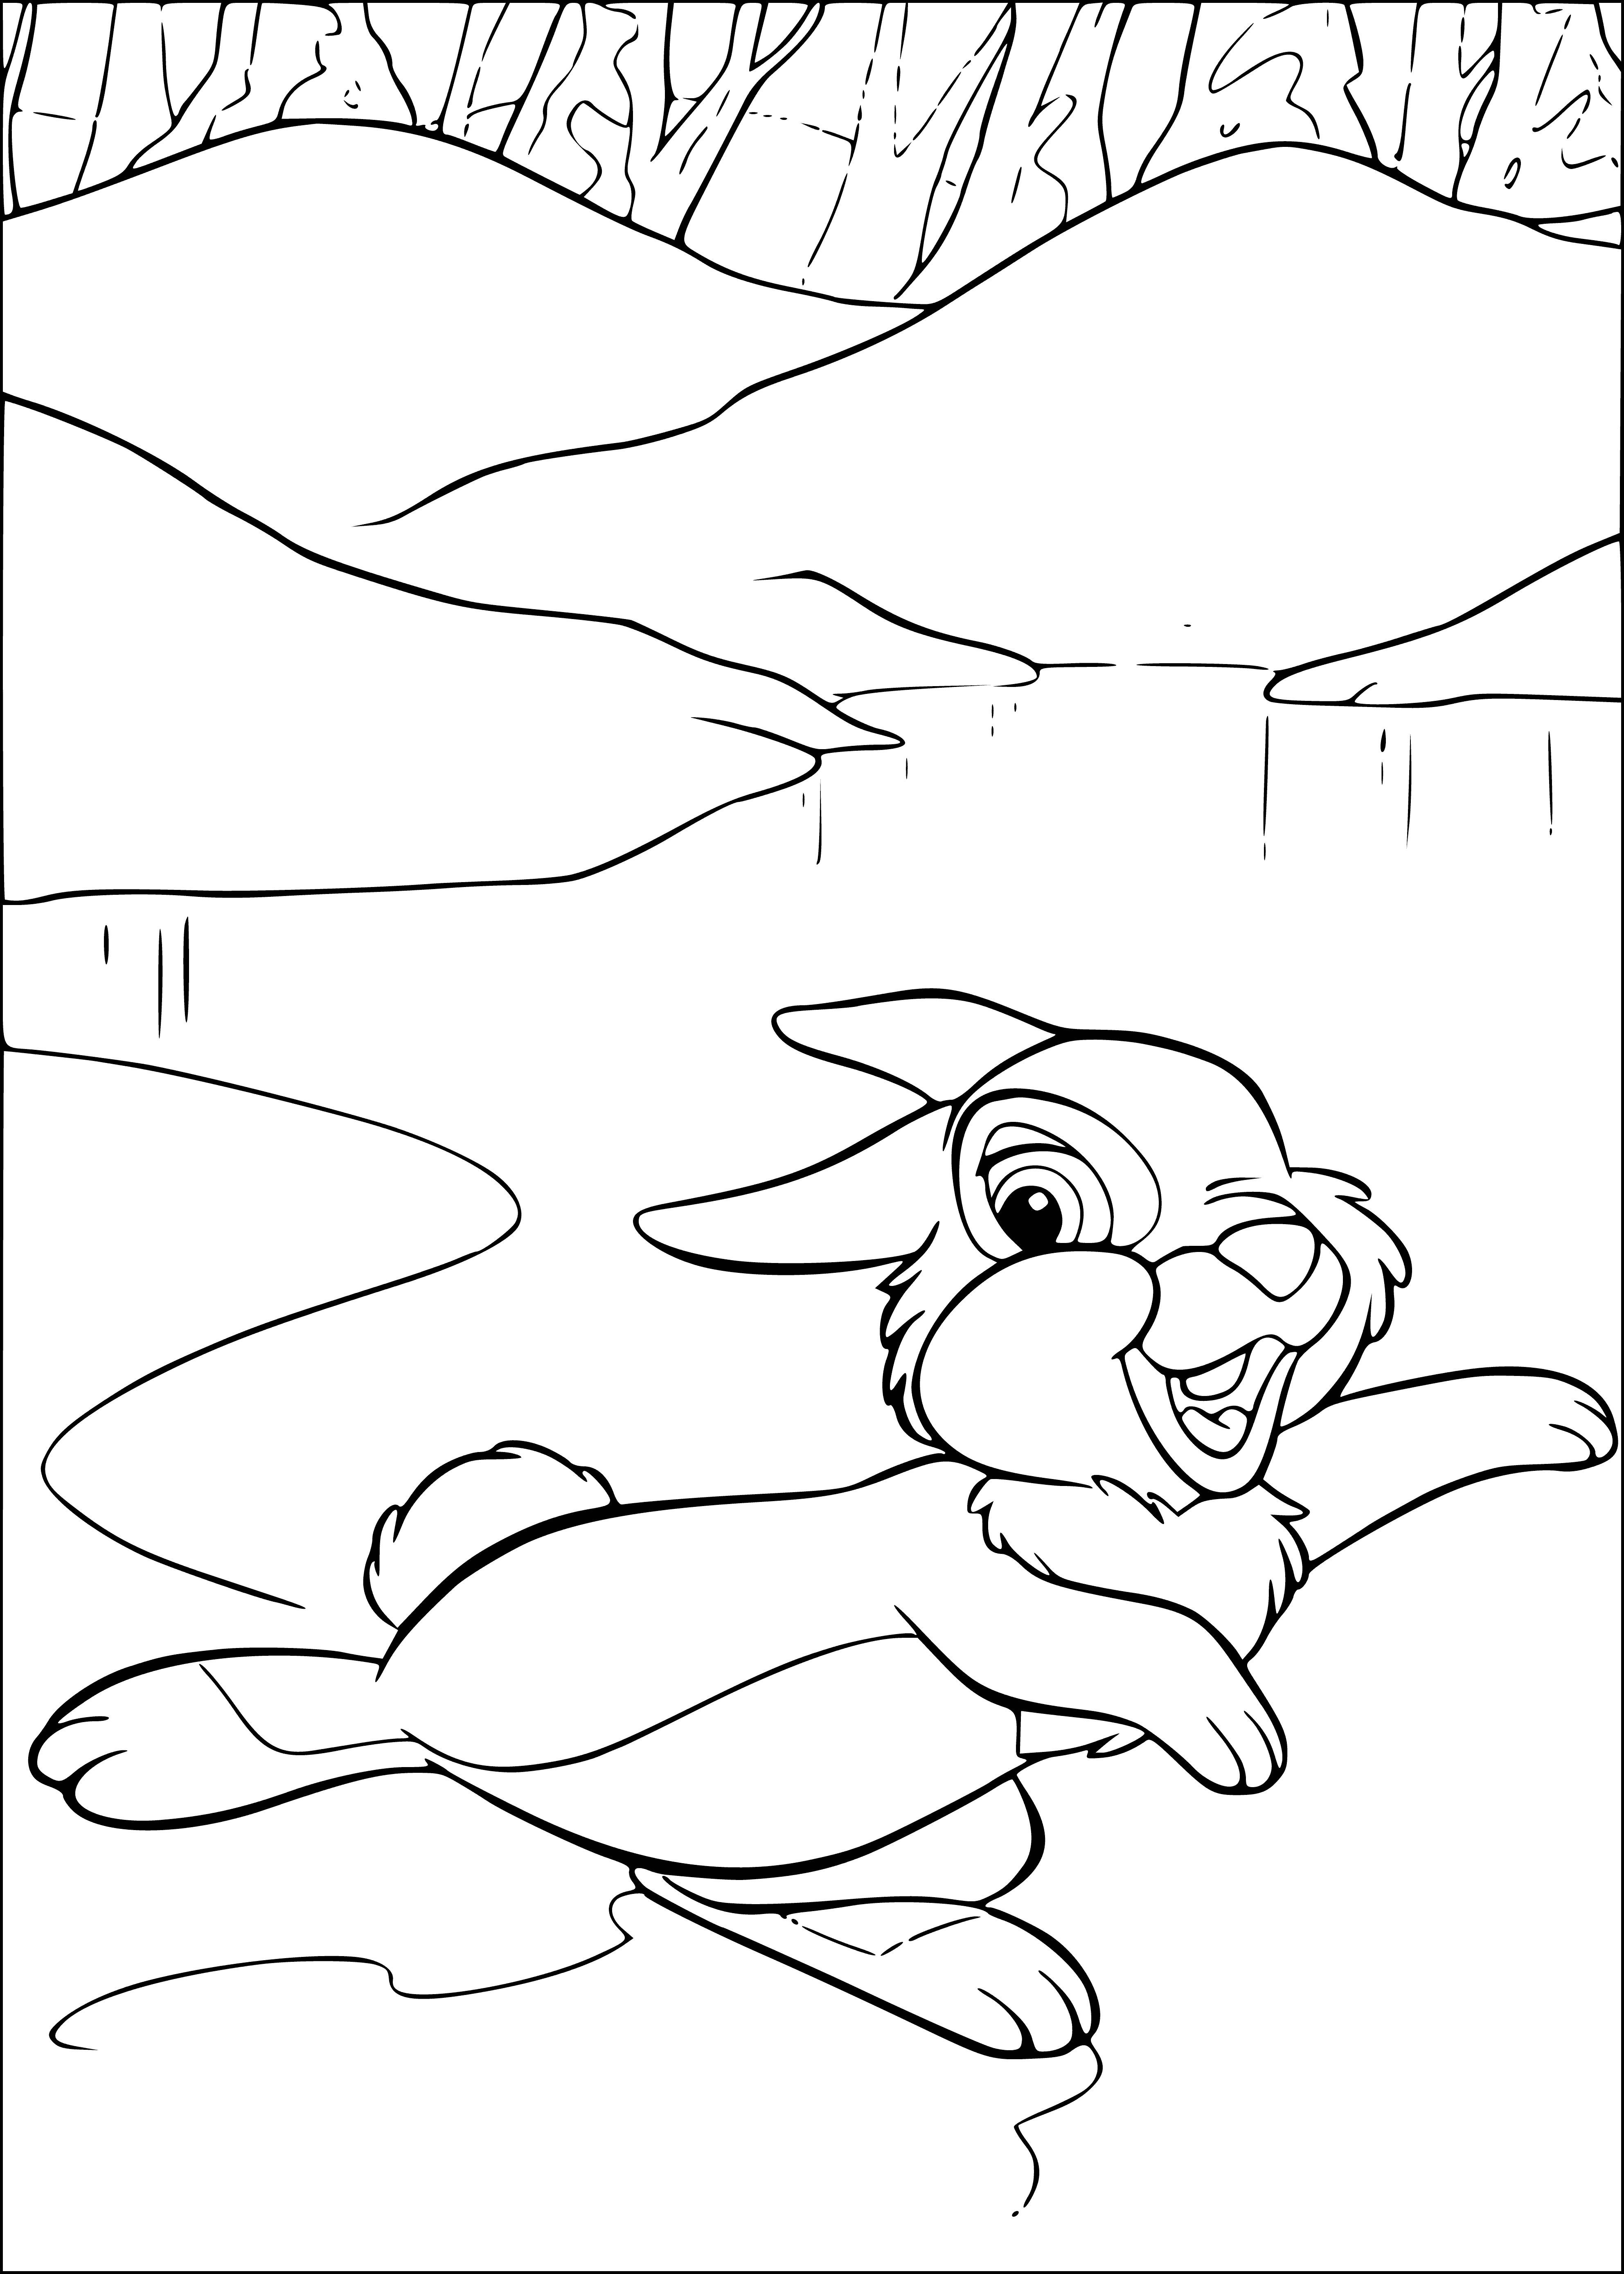 Hare on ice coloring page